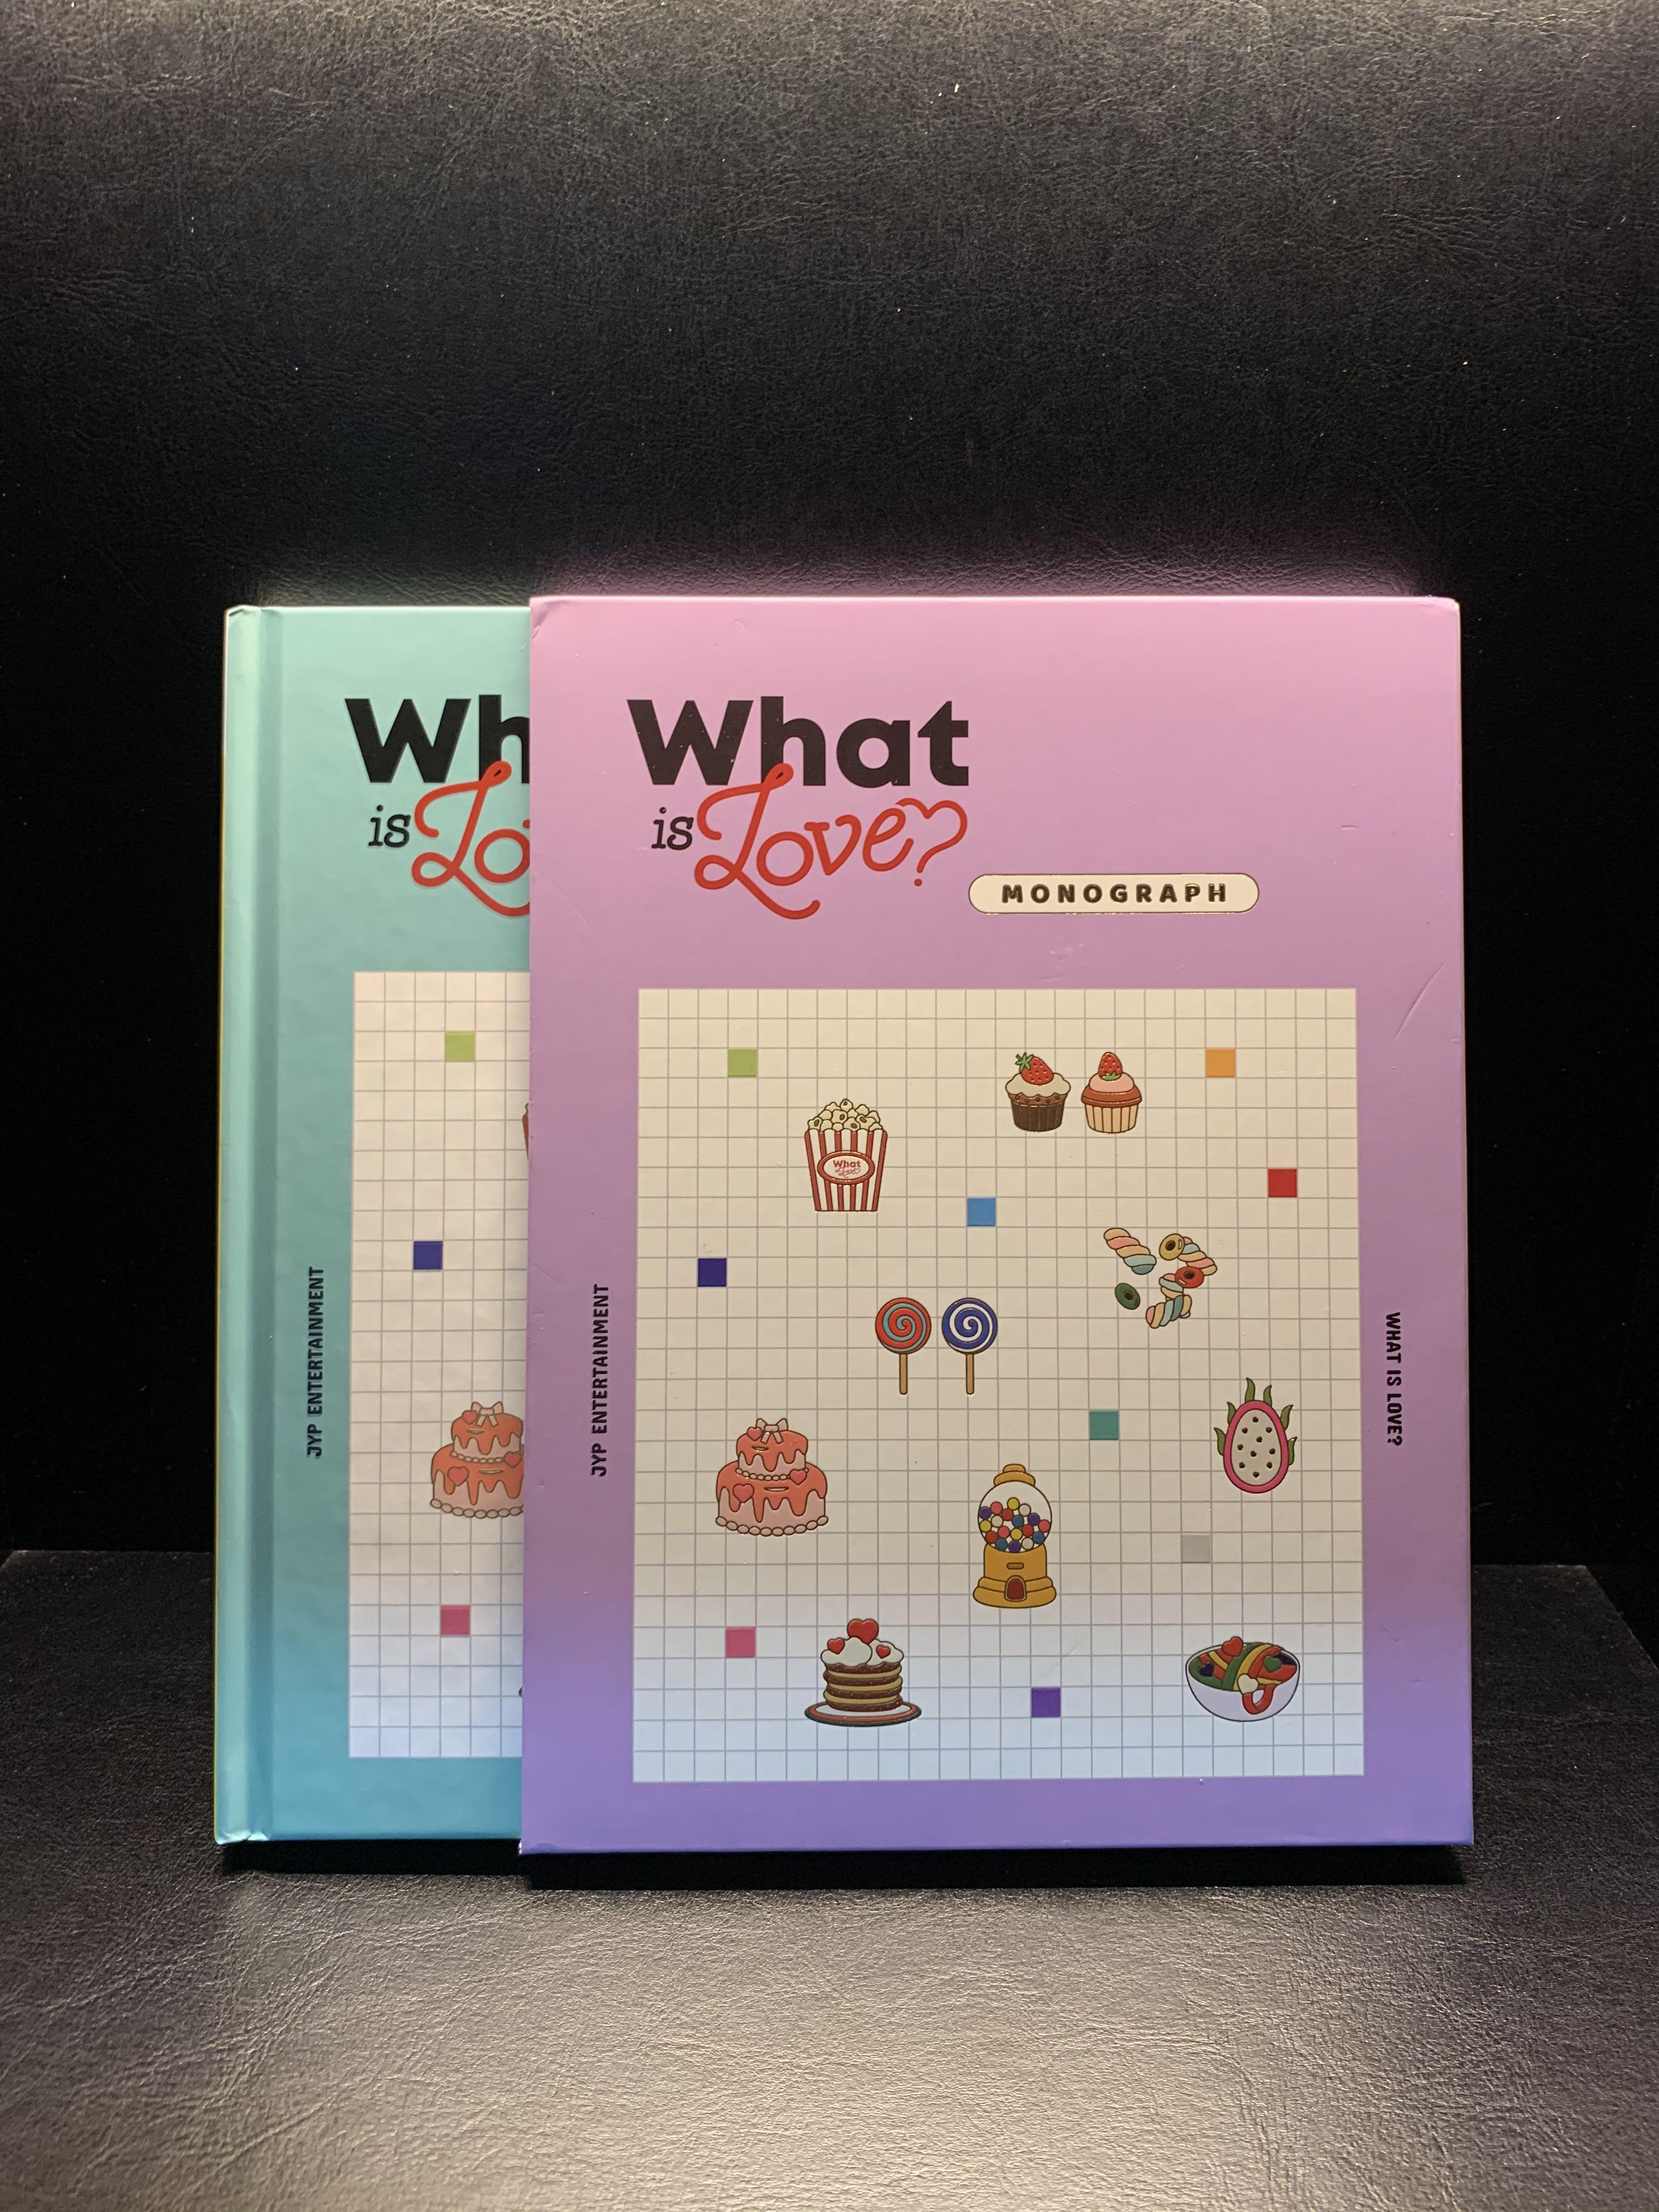 Twice - What is Love ? < 𝘮𝘰𝘯𝘰𝘨𝘳𝘢𝘱𝘩 >